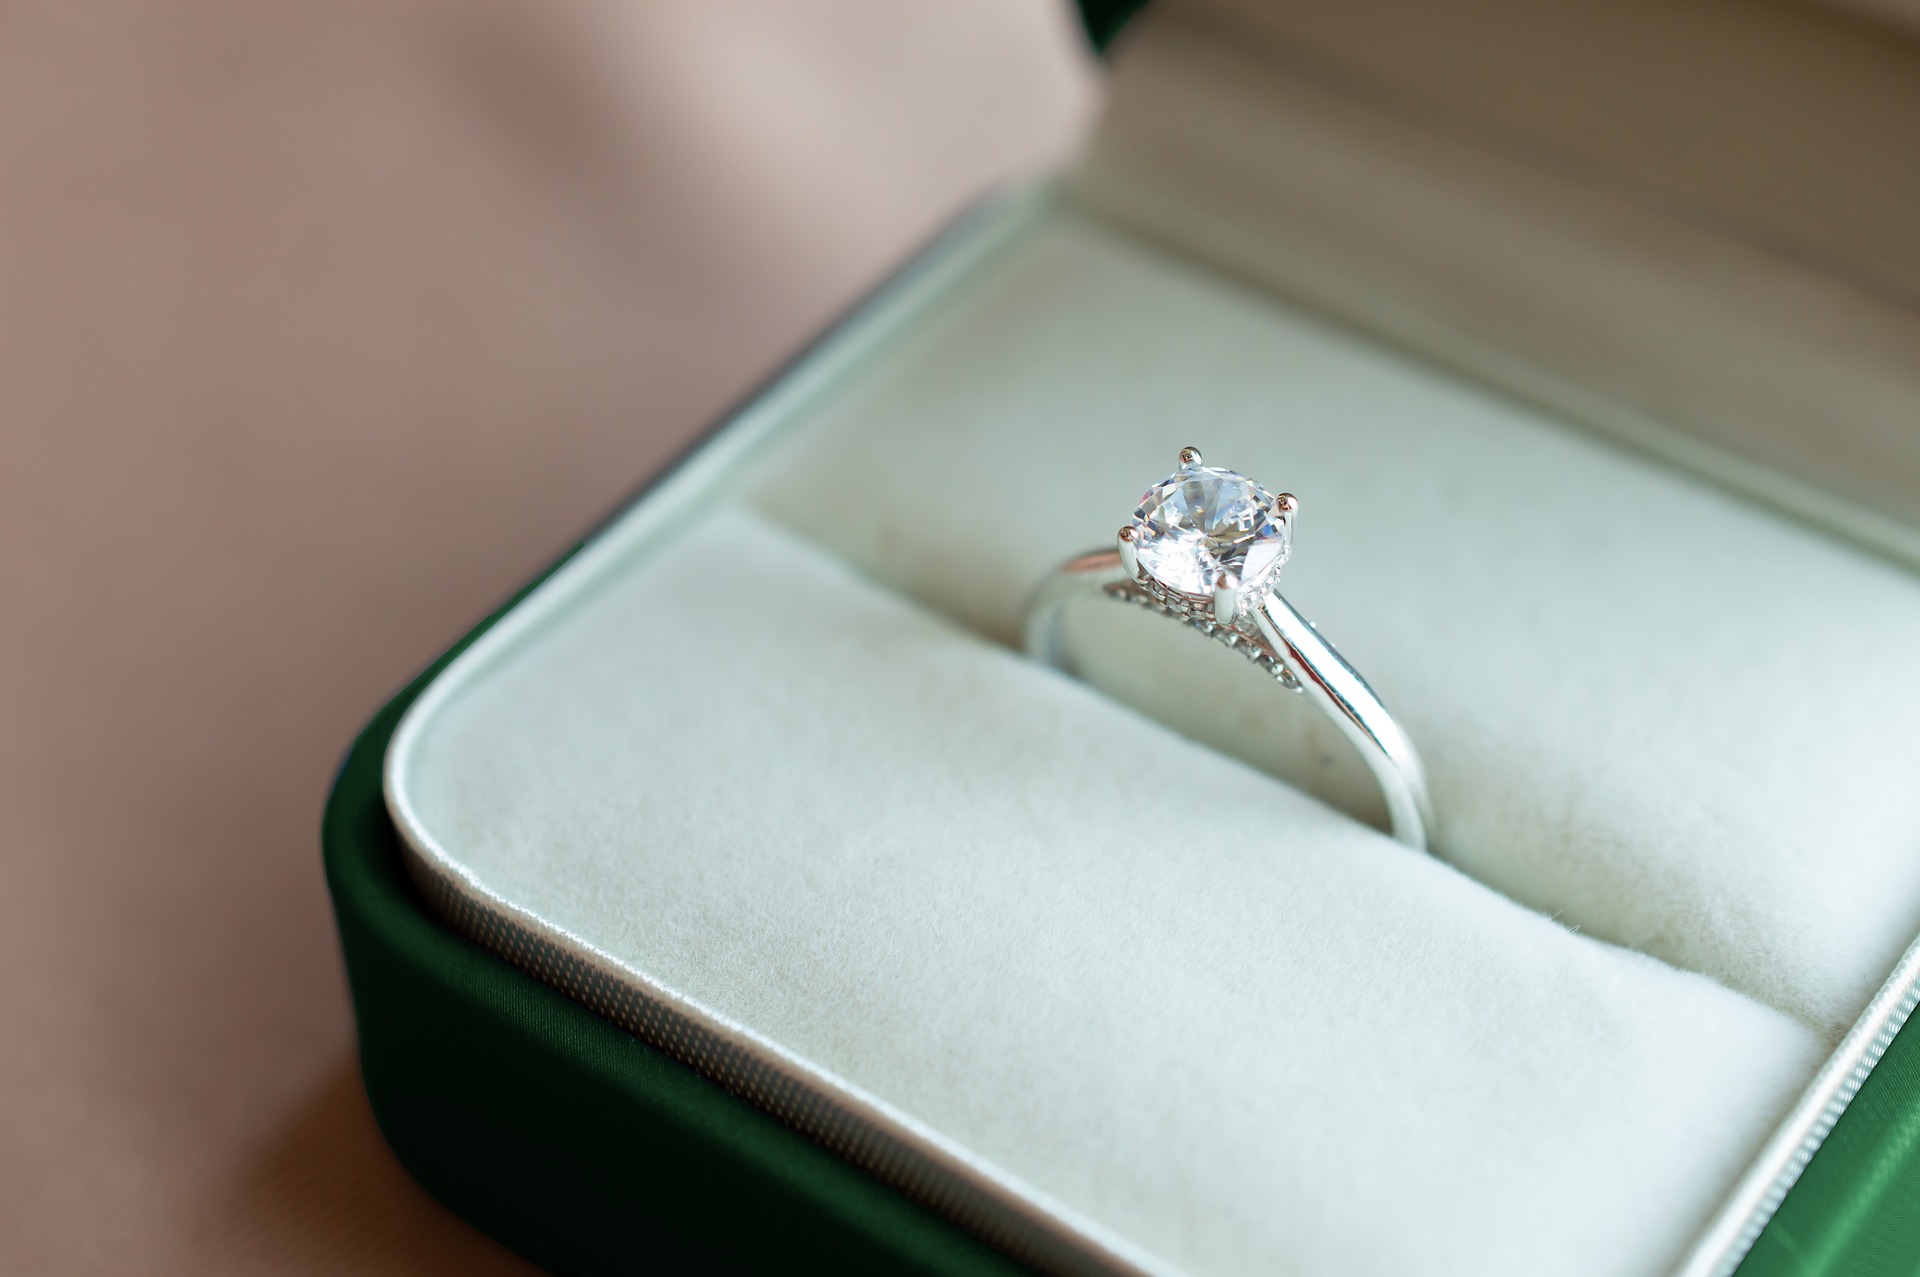 Diamond ring in a gift box